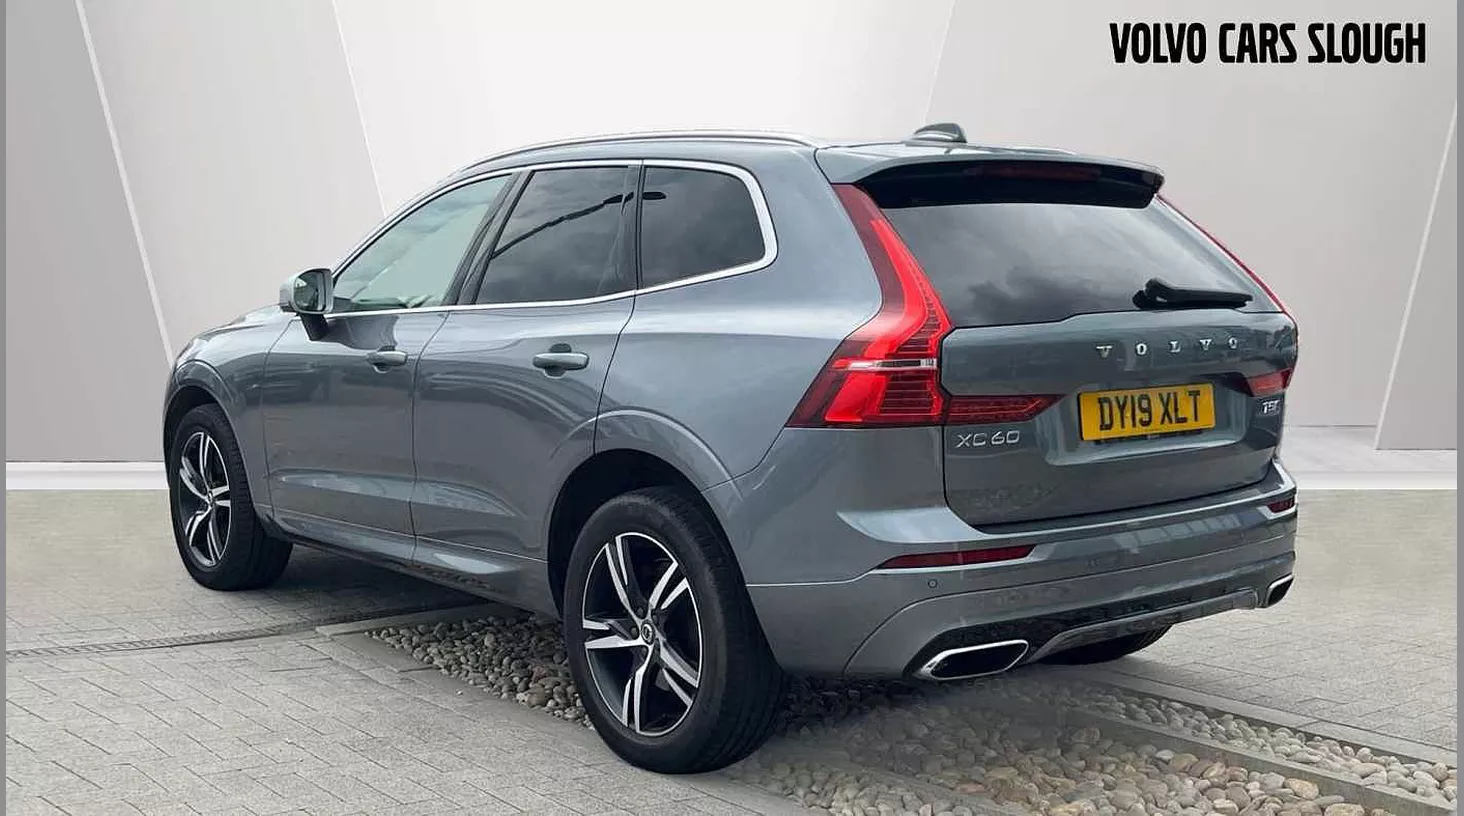 Volvo XC60 2.0 T5 [250] R DESIGN 5dr AWD Geartronic